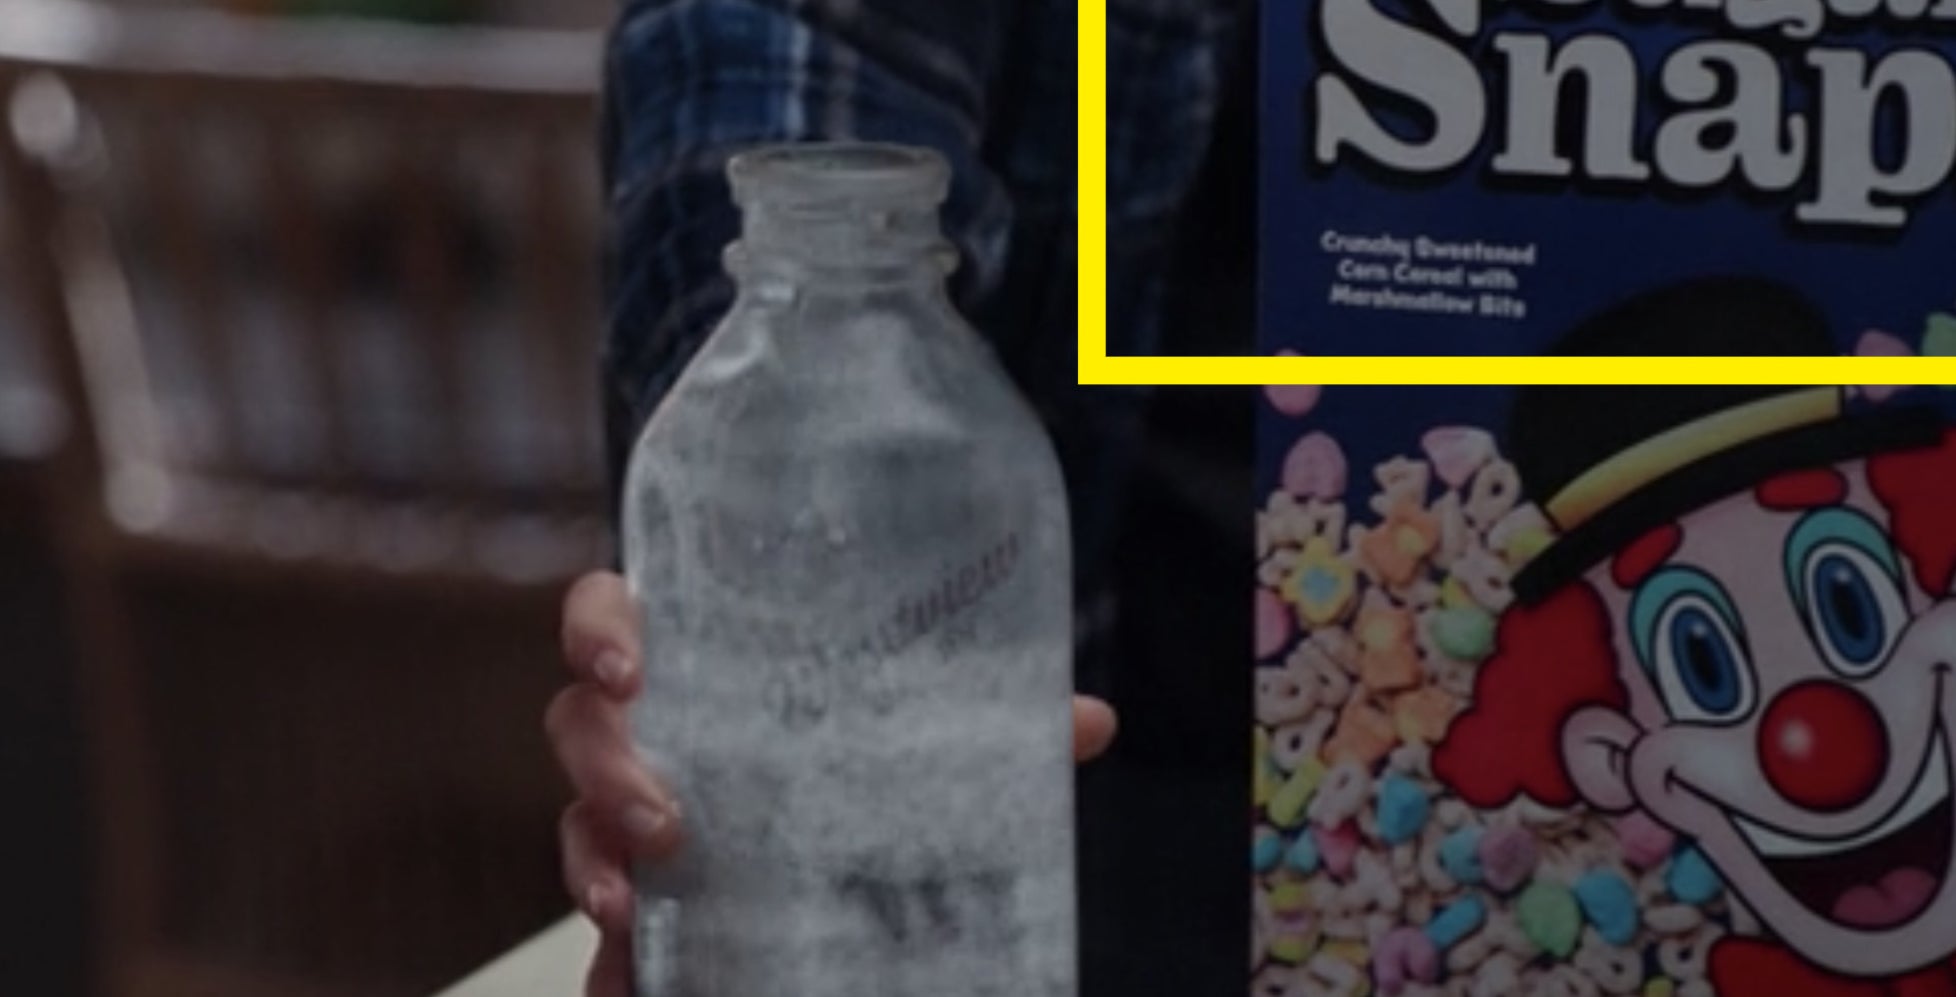 A close-up of Wanda's cereal box, which reads "Sugar Snaps"